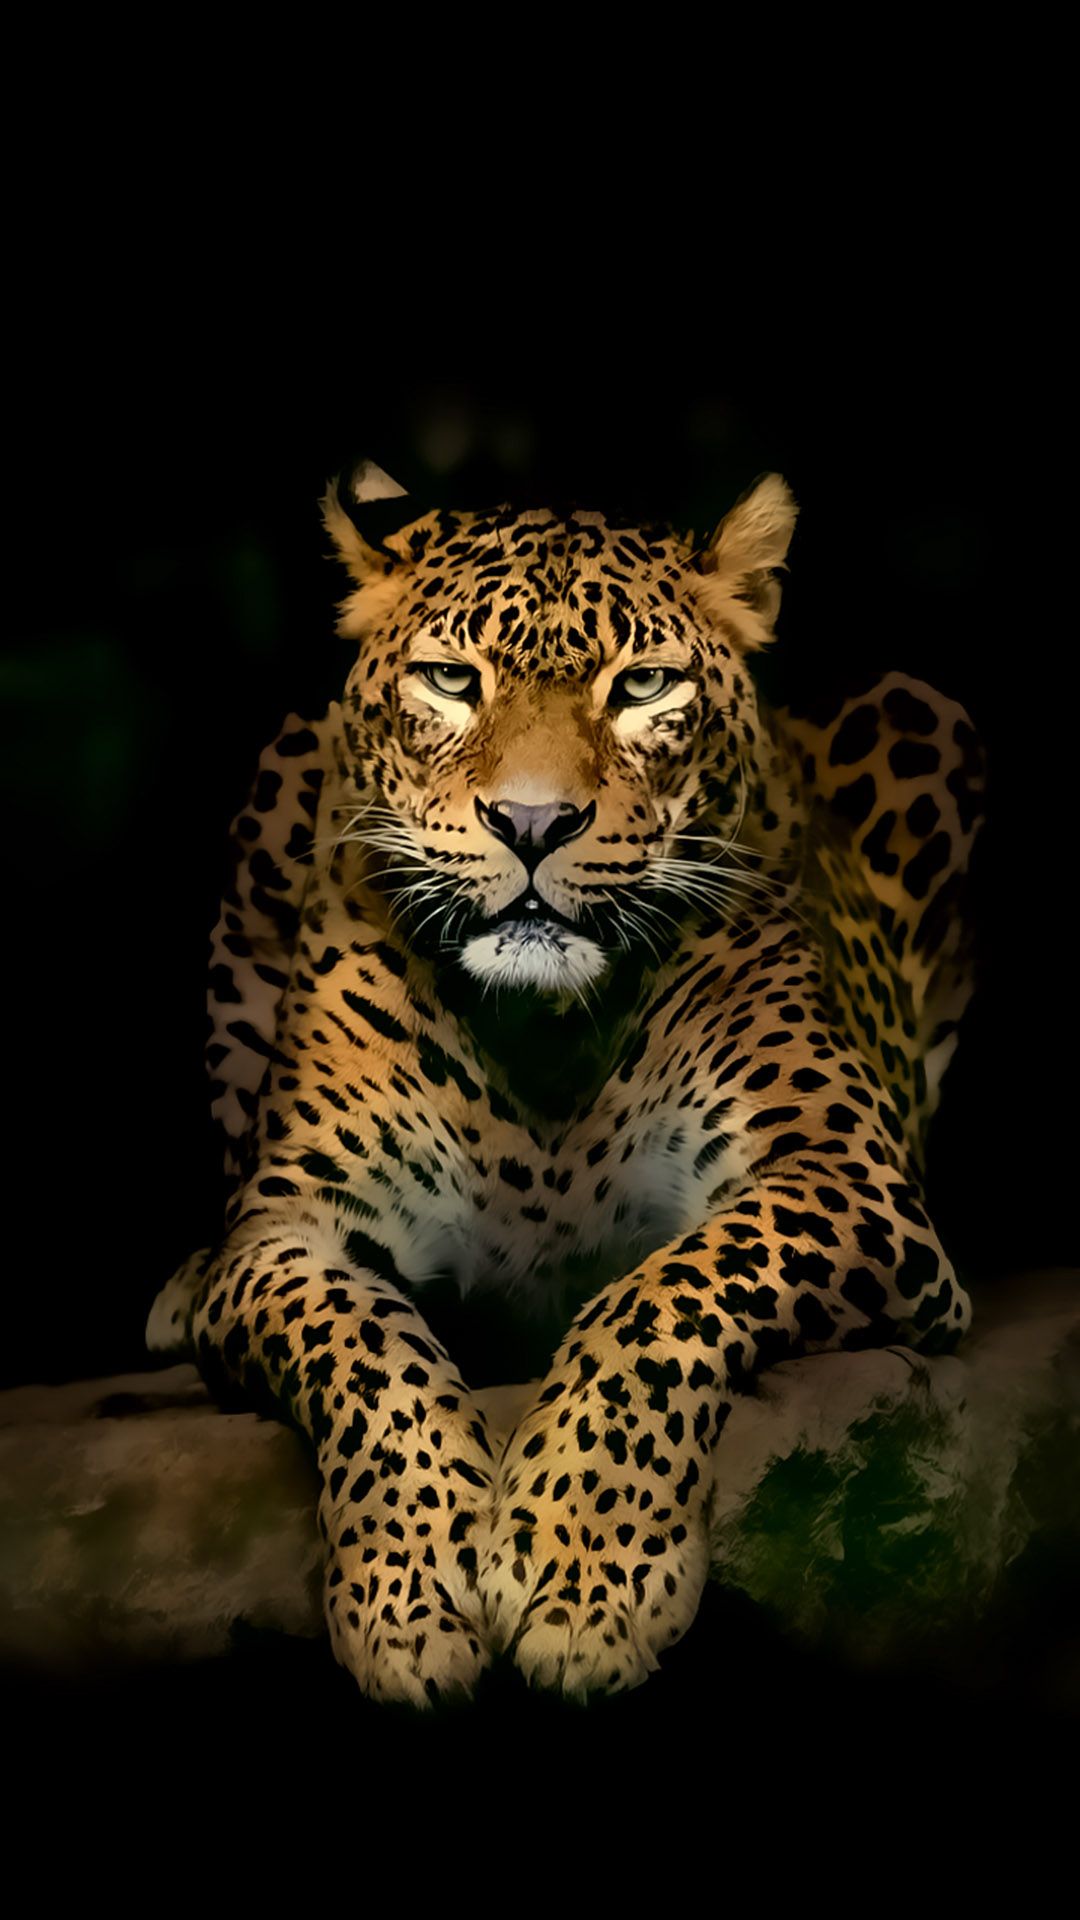 Serious Leopard 3d Spots Illustration Wild Animal Android - Ultra Hd 4k  Wallpaper For Mobile - 1080x1920 Wallpaper 